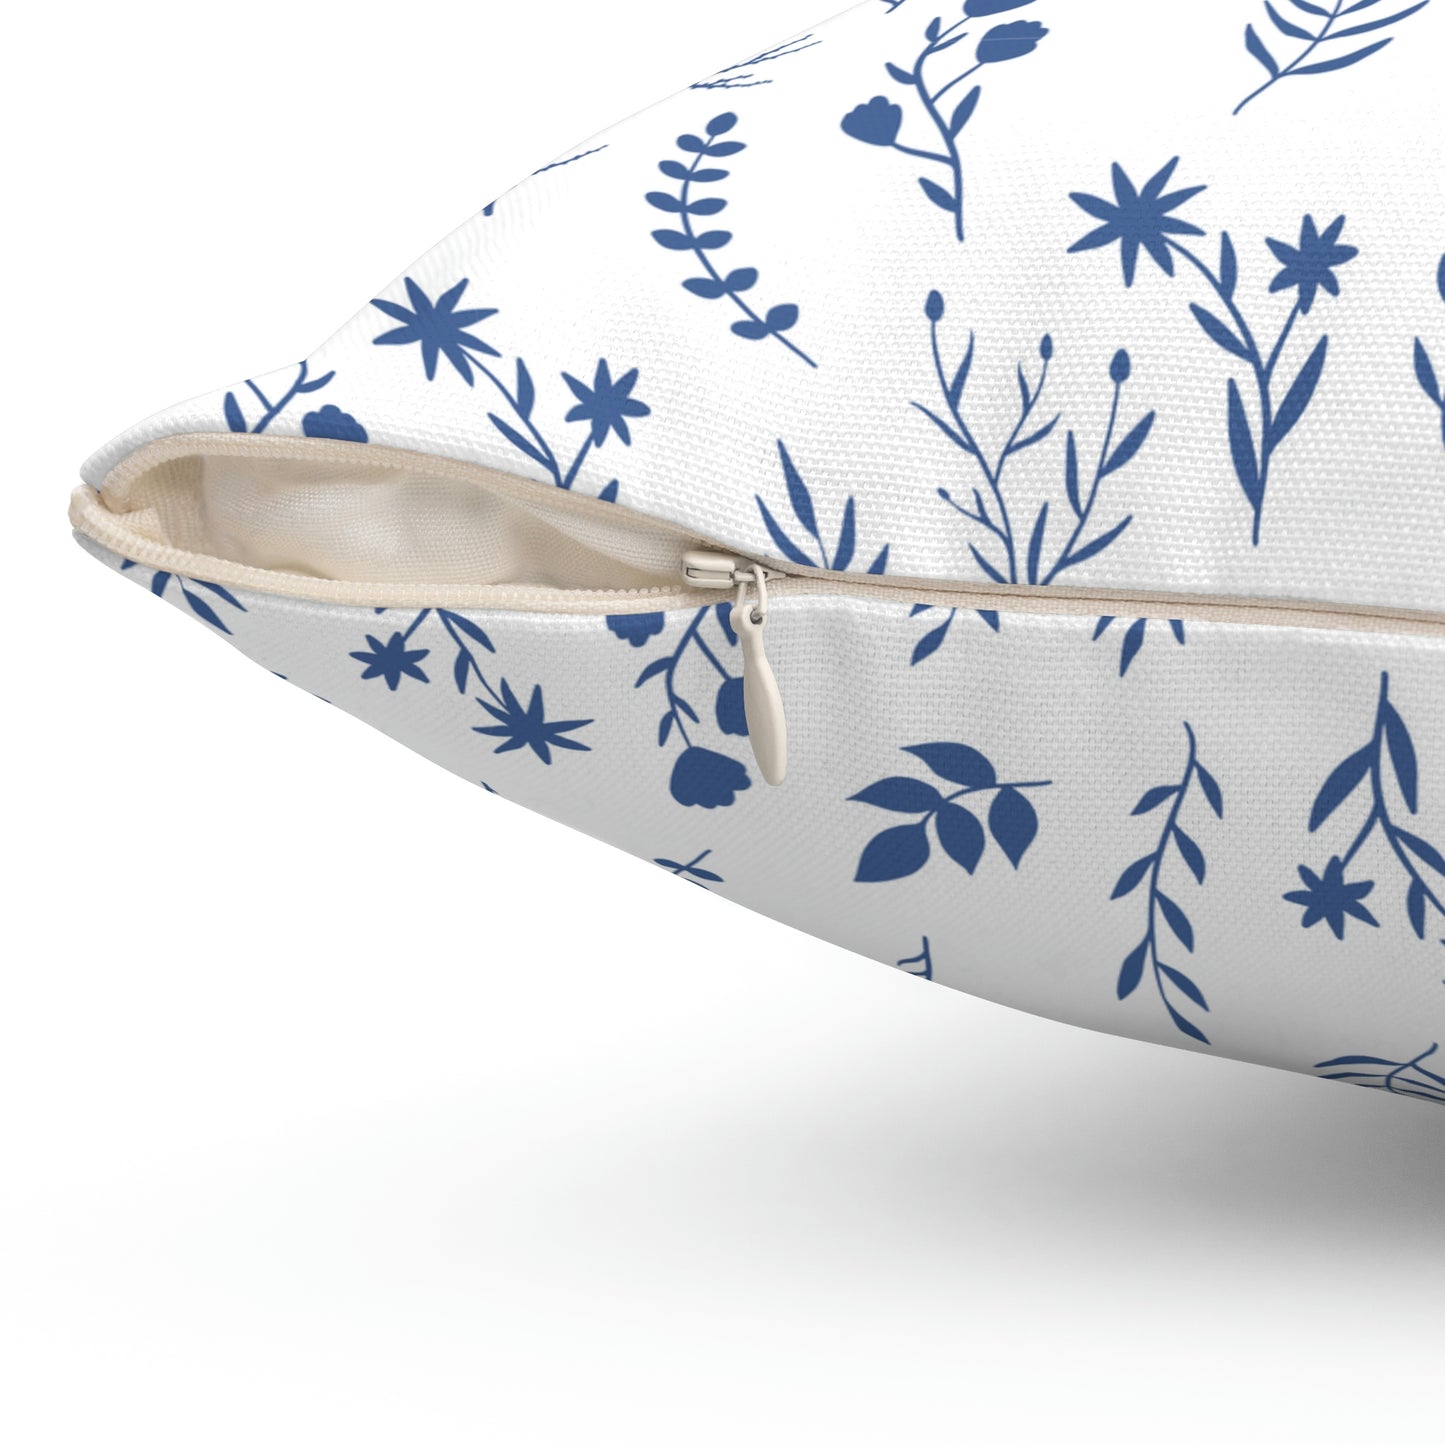 Indigo Blue and White Floral Print Pillow | 4 Sizes Available